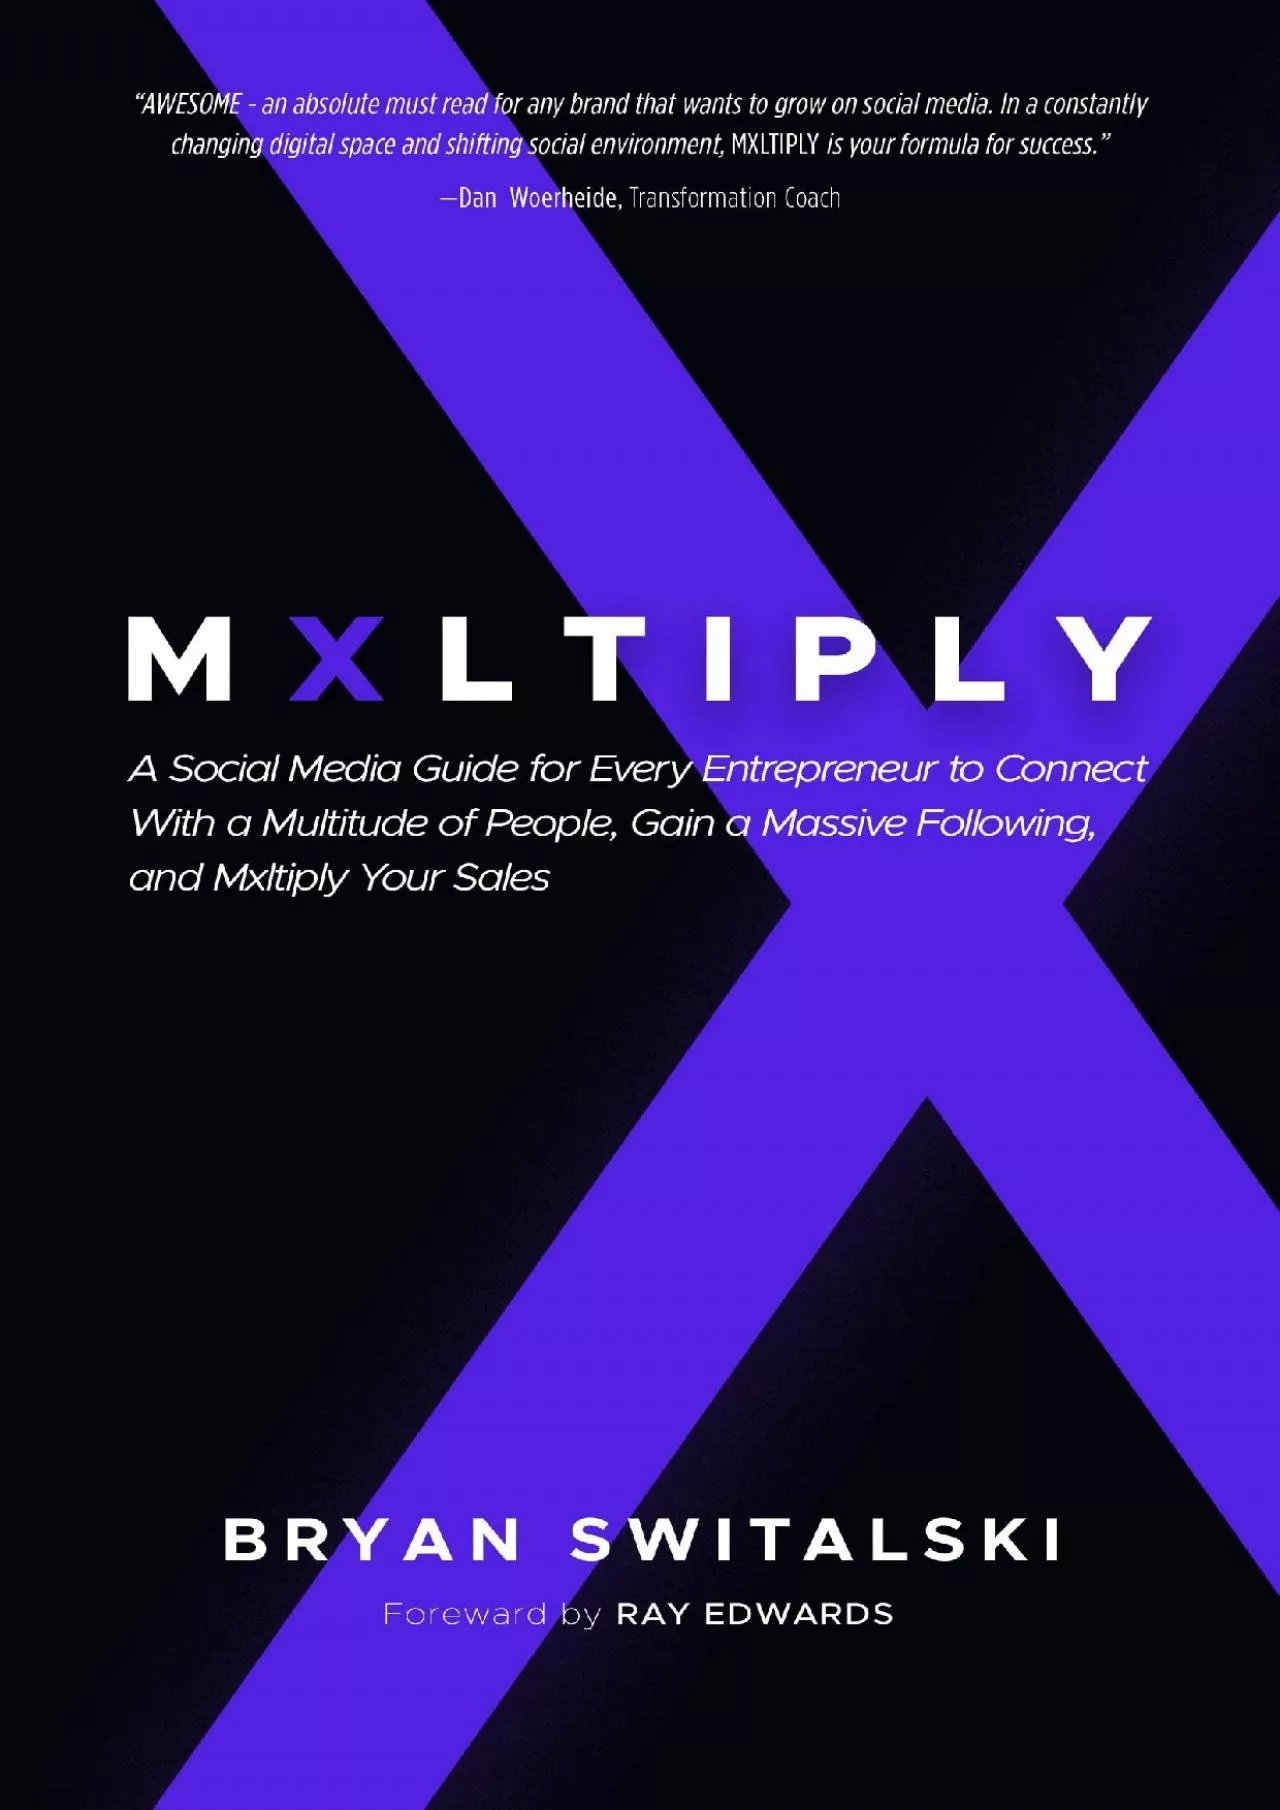 MXLTIPLY A Social Media Guide for Every Entrepreneur to Connect With a Multitude of People